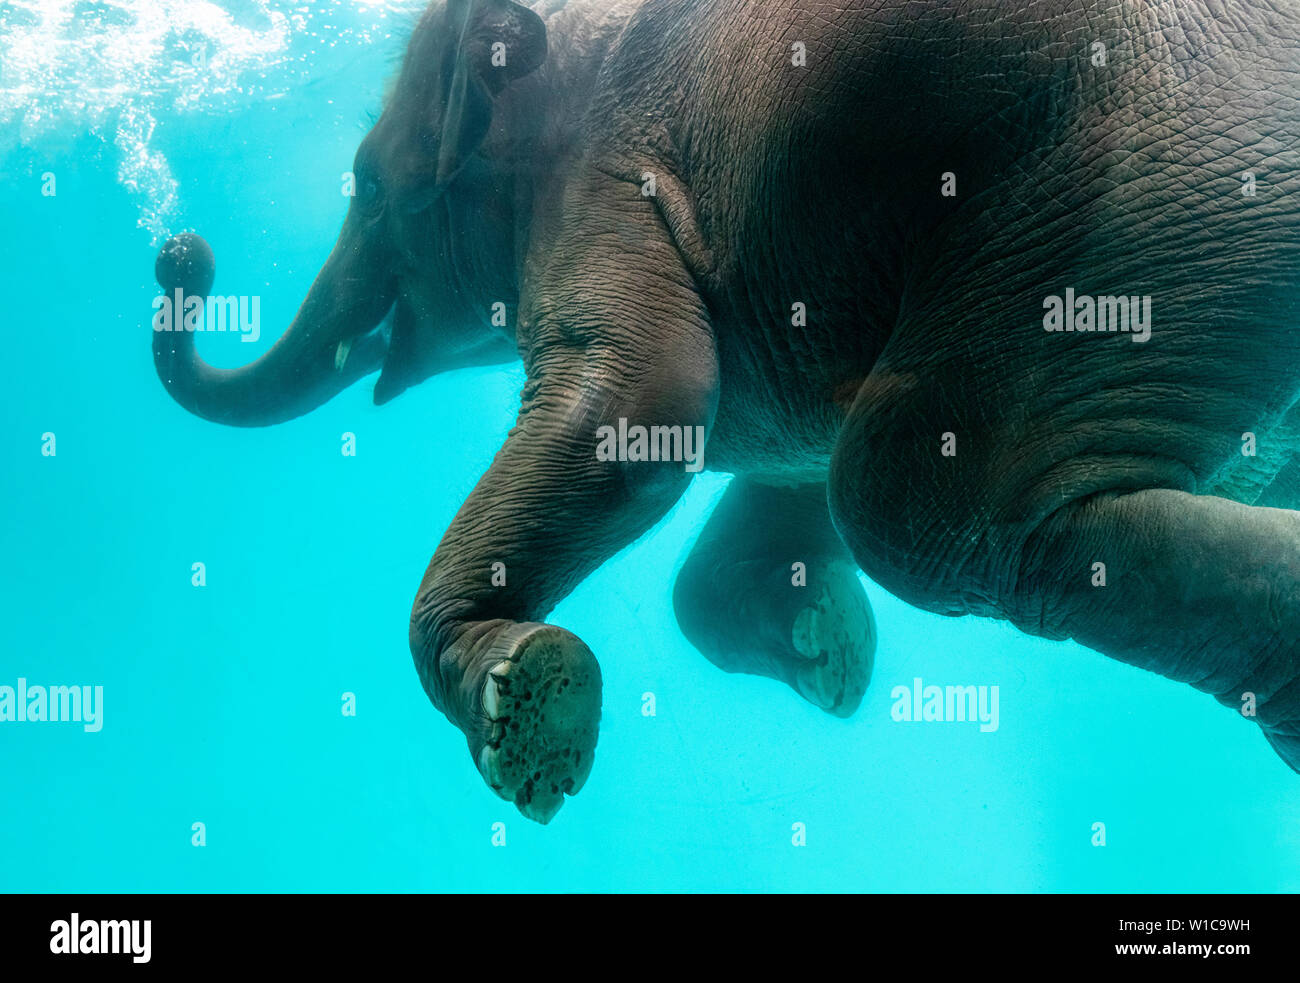 Elephant show swimming and blow the bubbles out of the trunk underwater in Thailand. Stock Photo